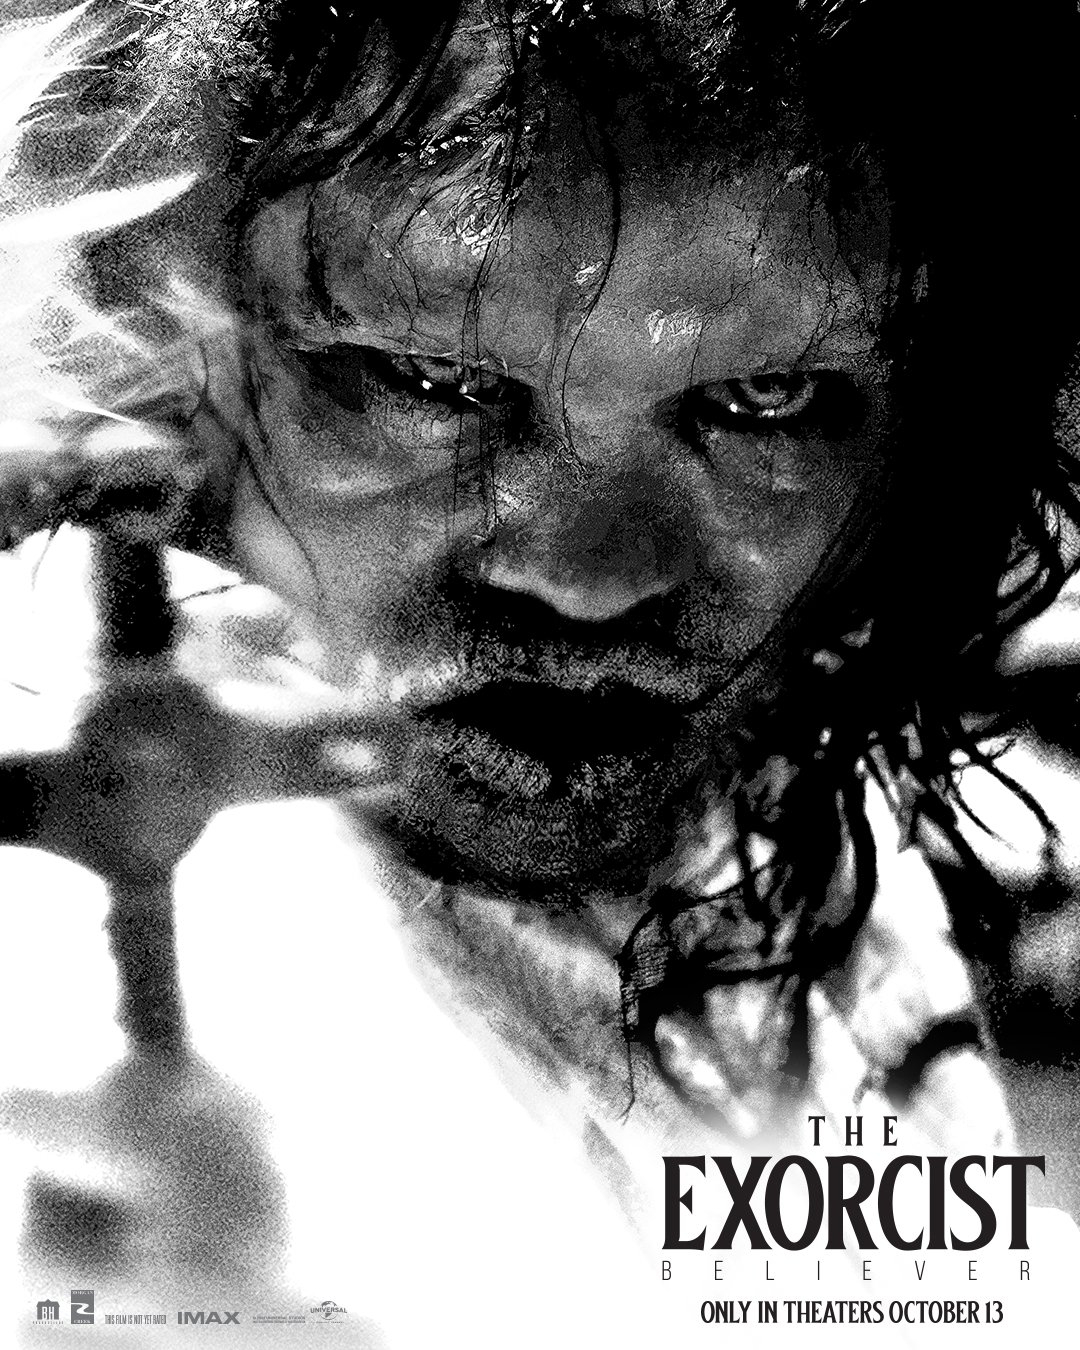 the-exorcist-beleiver-reboot-